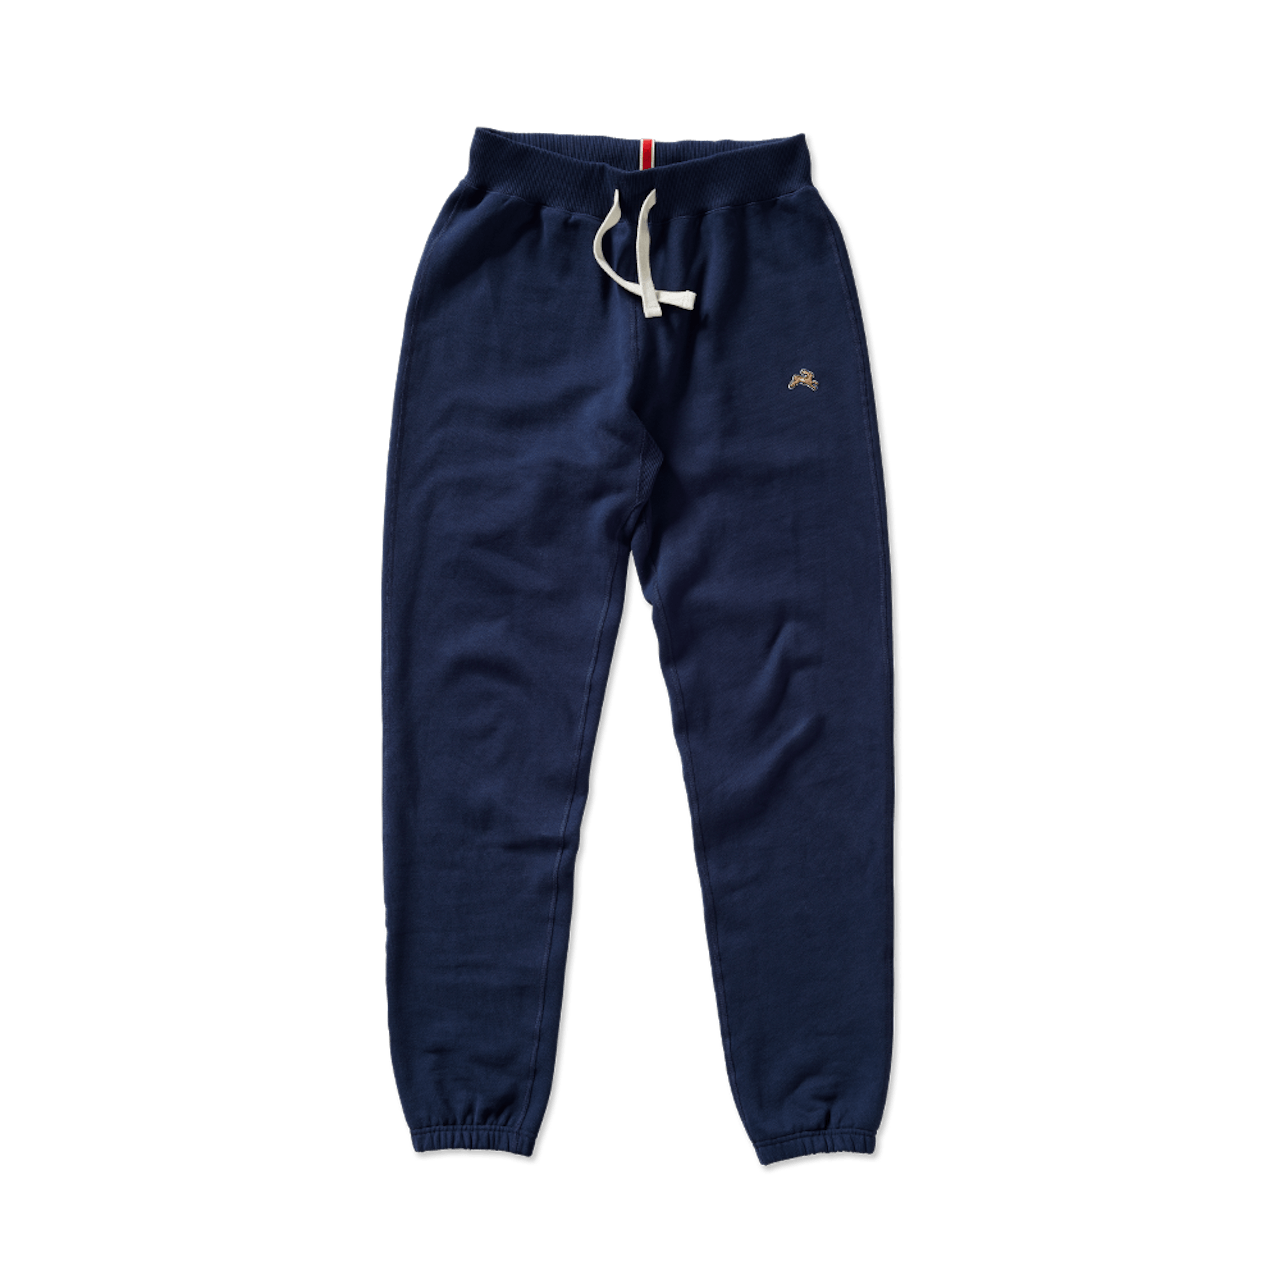 https://tracksmith-media.imgix.net/Mens_Trackhouse_Sweatpants_Navy.png?auto=format,compress&crop=faces&dpr=2&fit=crop&h=640&w=640